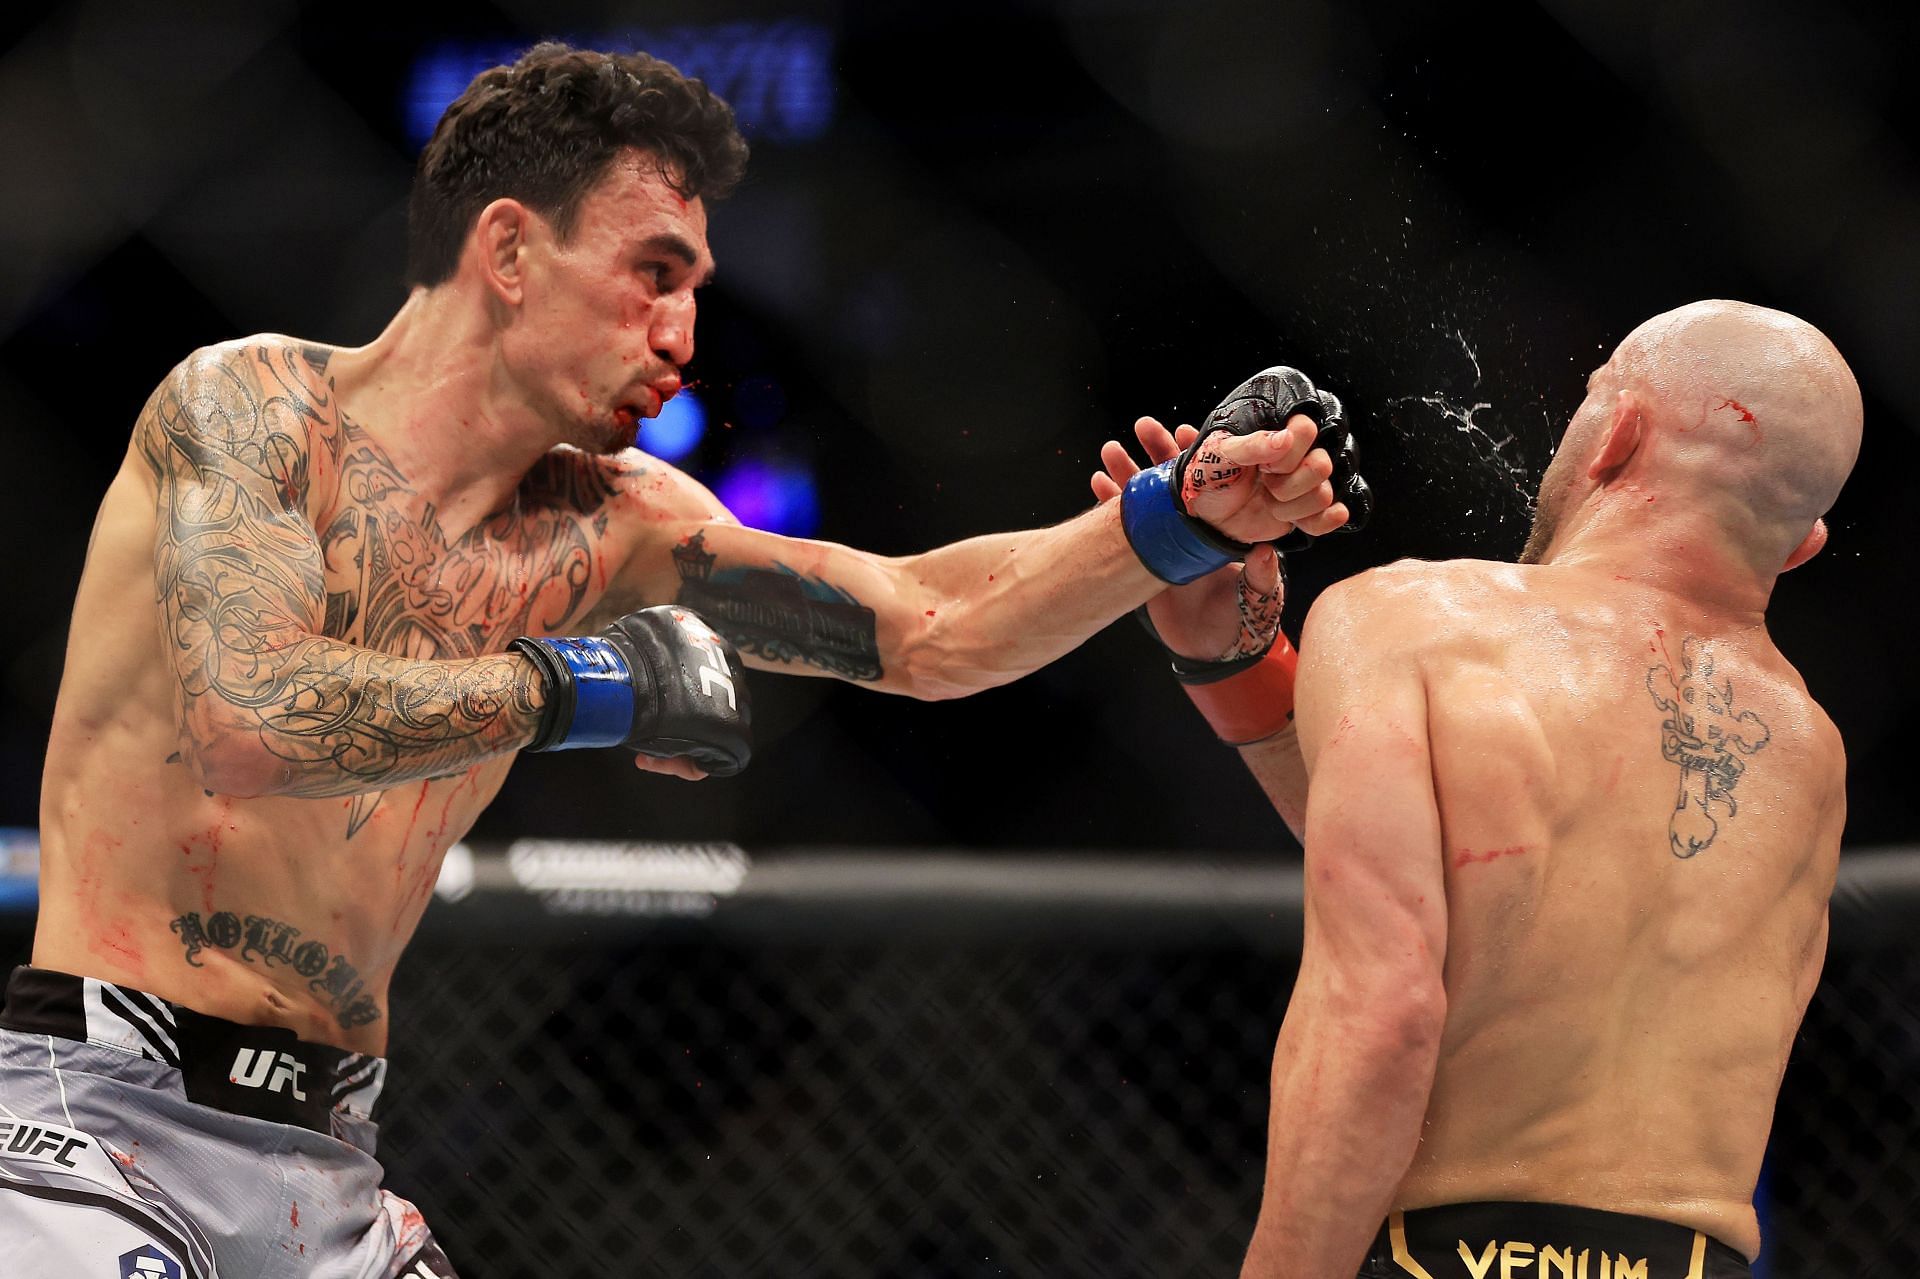 Max Holloway will hope his win over Arnold Allen earns him another crack at Alexander Volkanovski